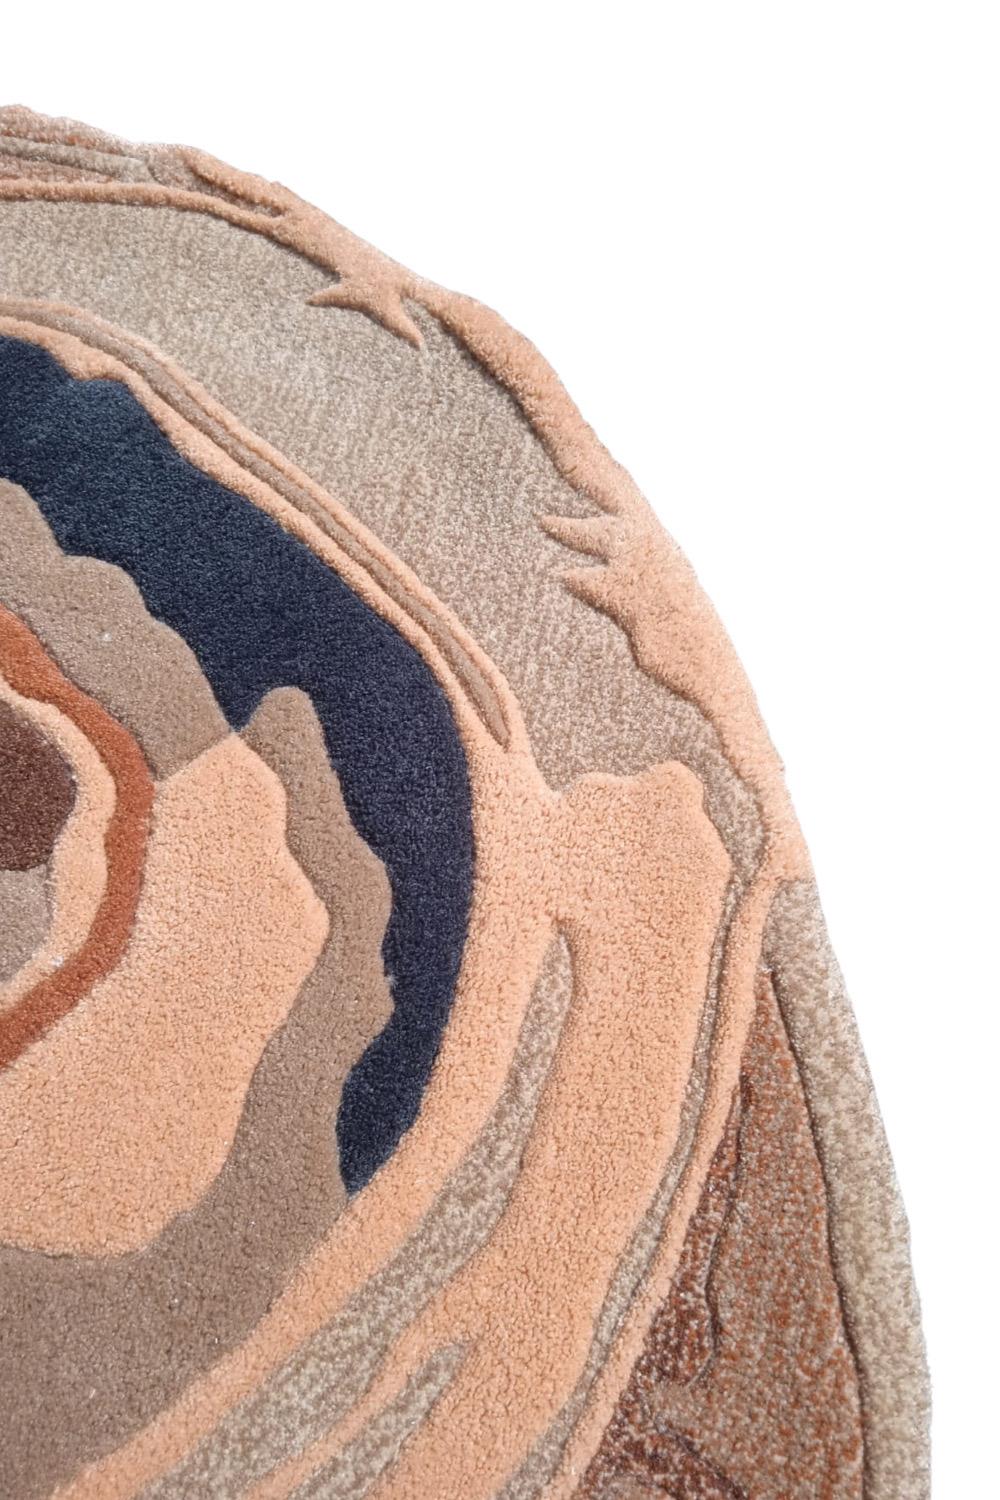 Modern Irregular Oval Circular Shapes with Beige Brown Tosca Wool Carpet by RAG Home For Sale